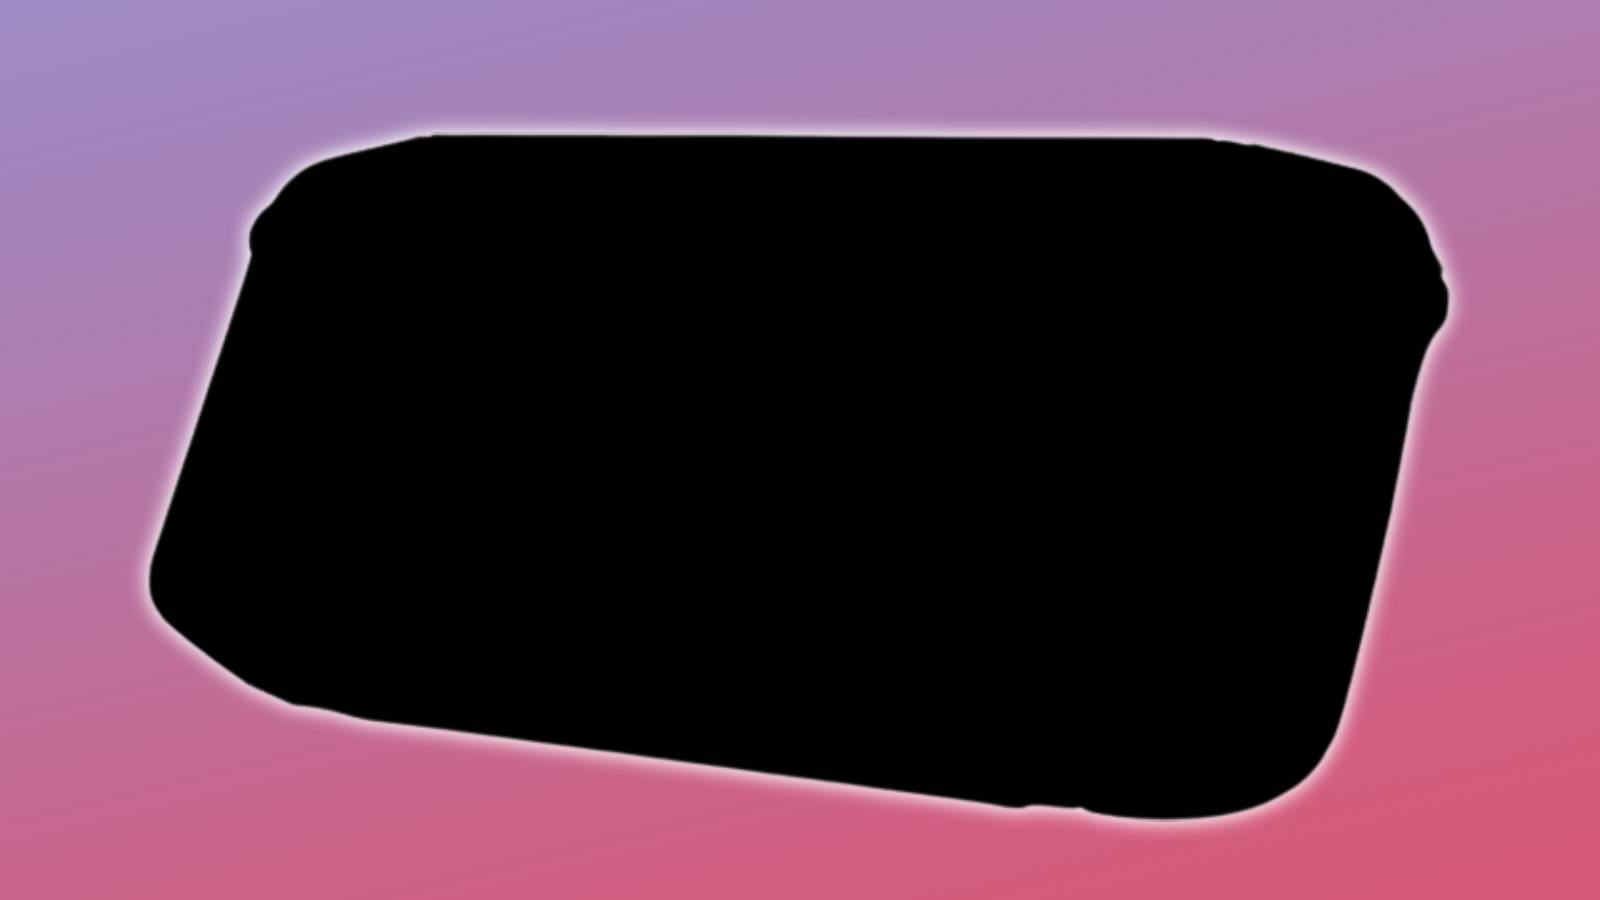 Image of the silhouette of a Lenovo Legion Go handheld, with a pink and purple background behind it.